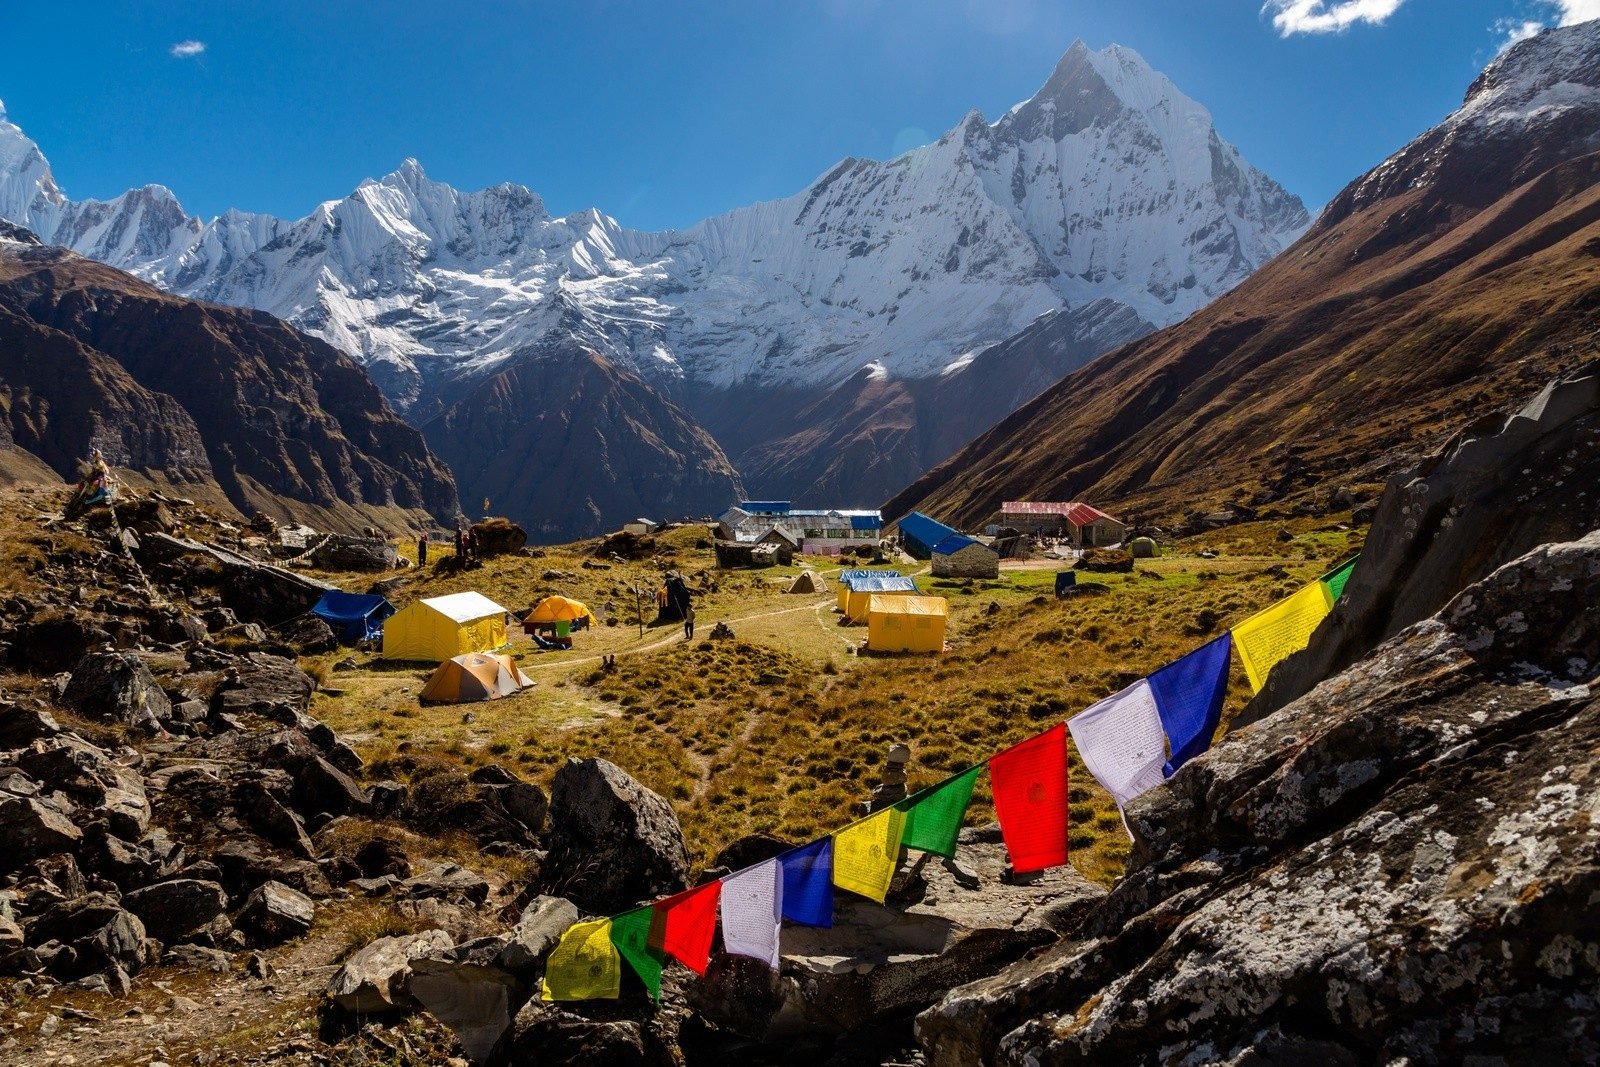 Prayer flags, a campsite and the snowy Himalayas on the Annapurna Trekking Circuit in Nepal.